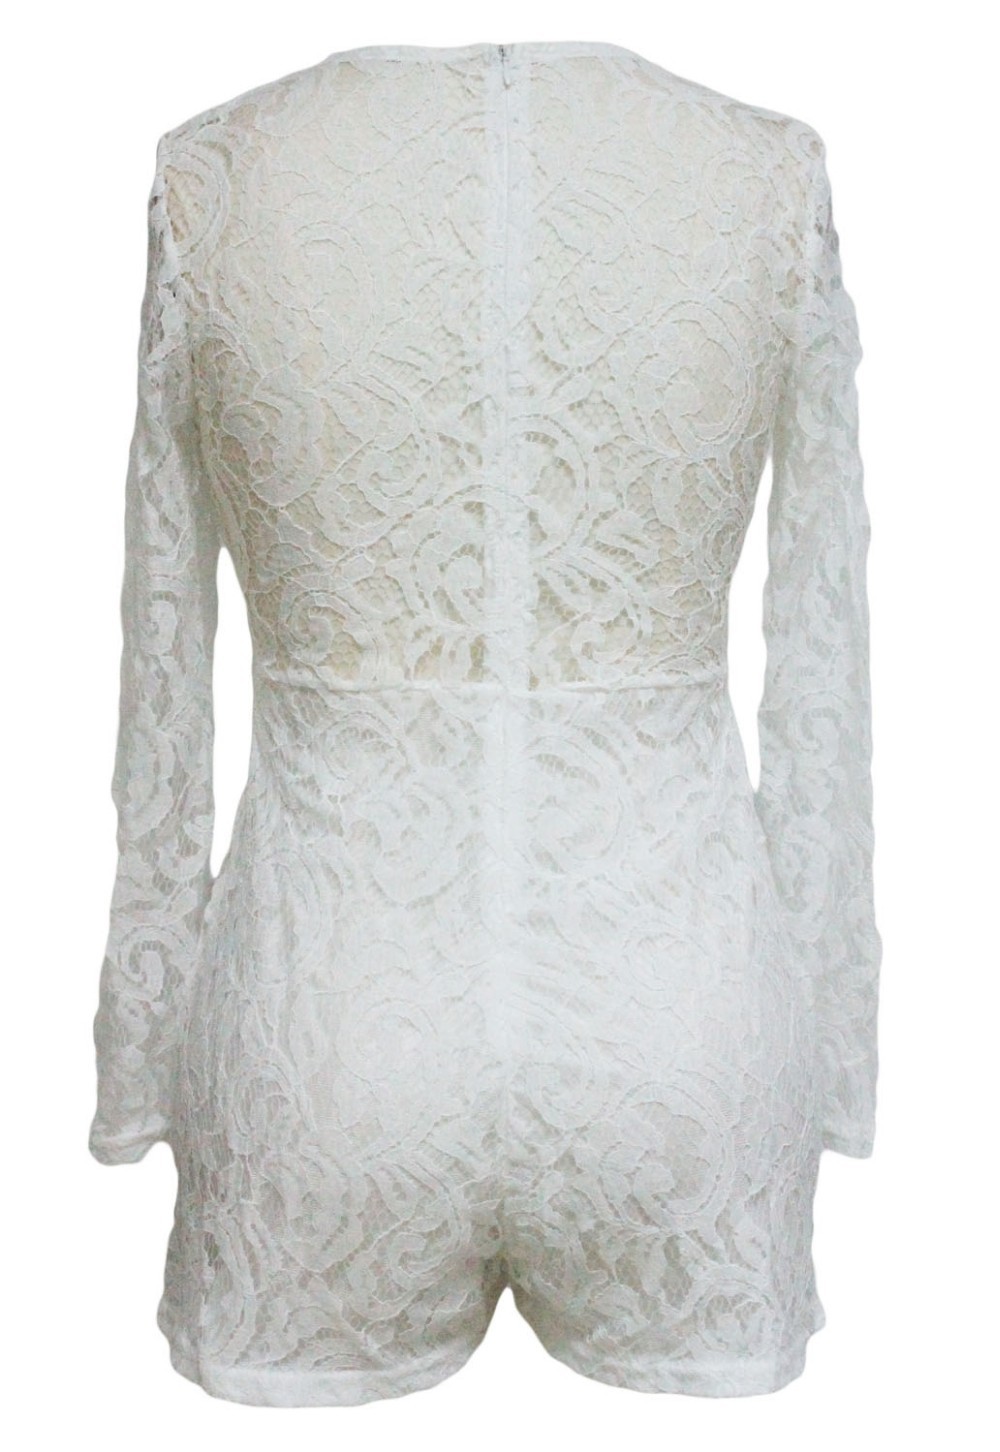 White-Alluring-Deep-V-Neck-Long-Sleeve-Lace-Romper-LC60071-1-3